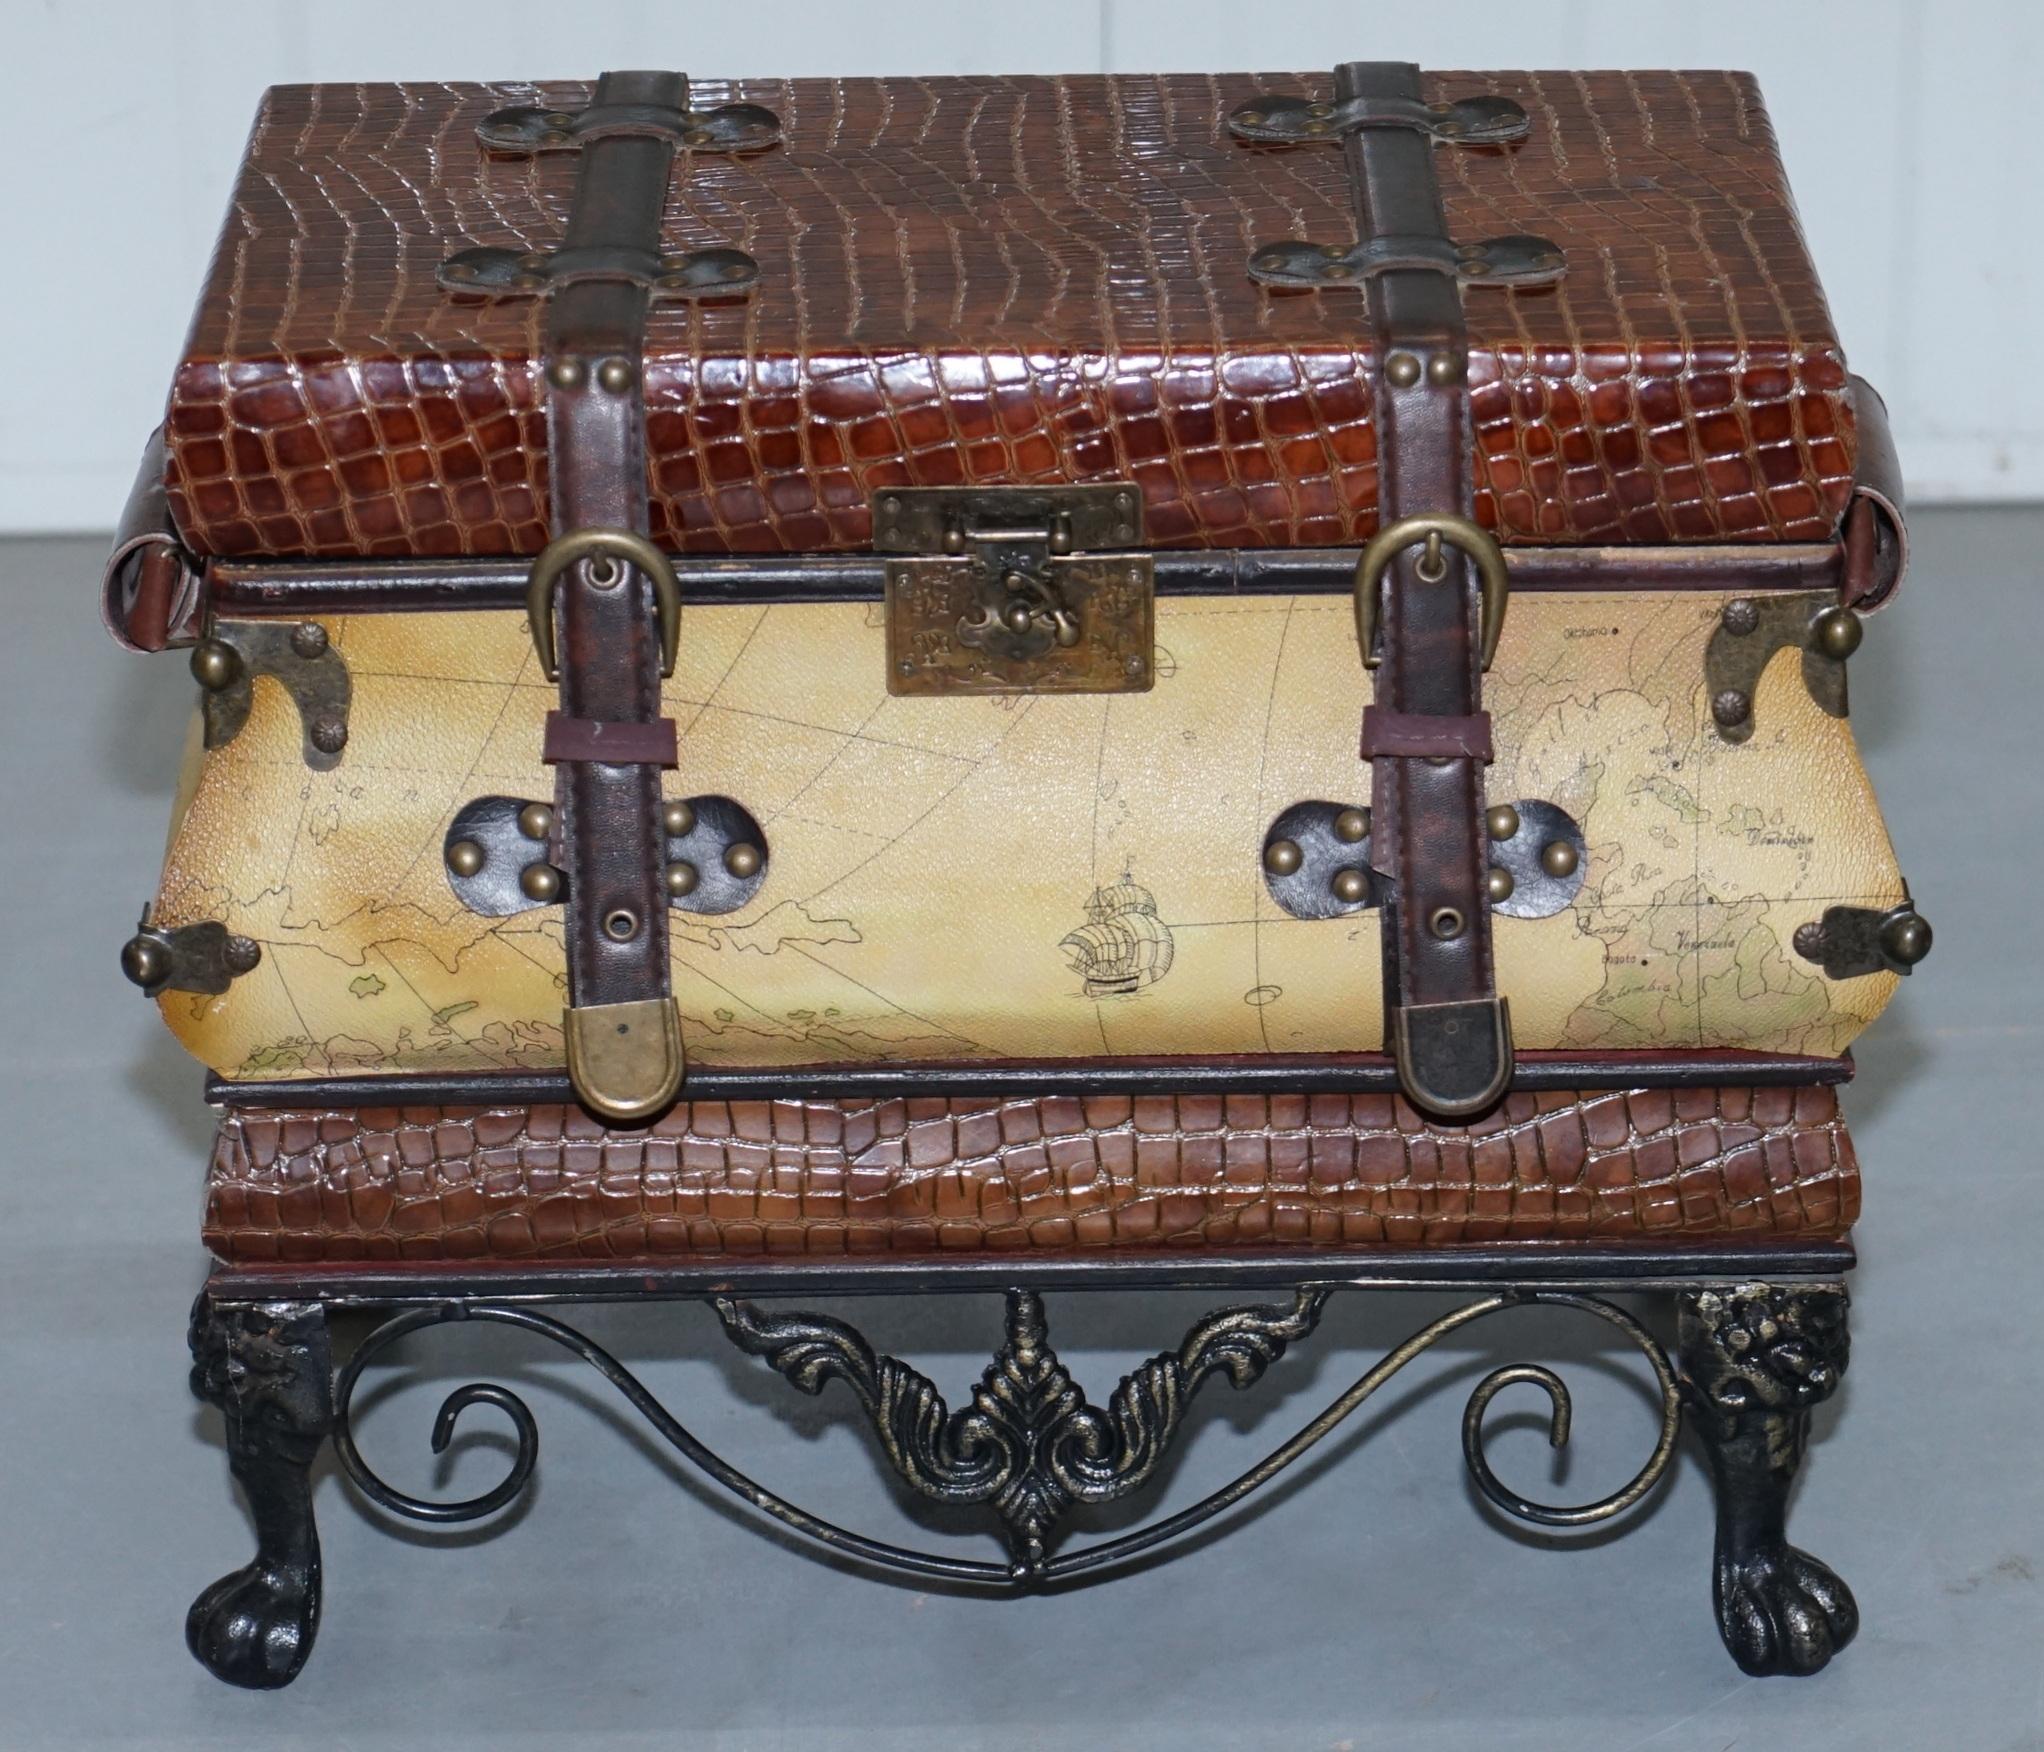 We are delighted to offer for sale this lovely little luggage trunk chest with leather straps, wrought iron base and map detailing

A sweet piece of furniture, the top opens up and it can be used for storage, the size is table top or floor based,